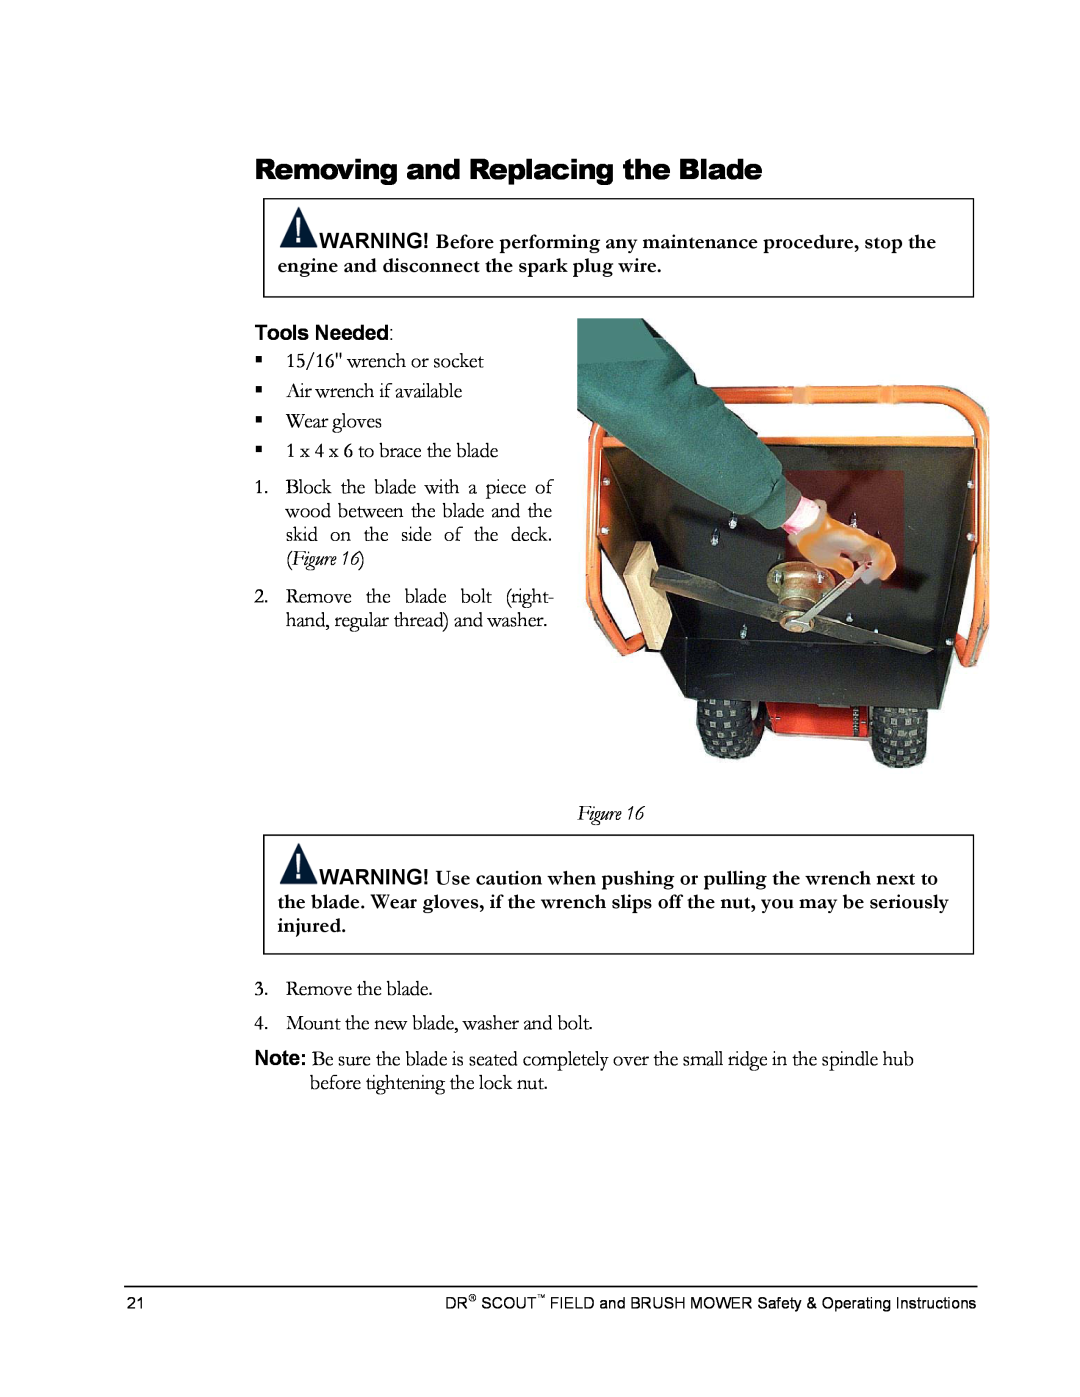 Country Home Products DR SCOUT FIELD and BRUSH MOWER manual Removing and Replacing the Blade 